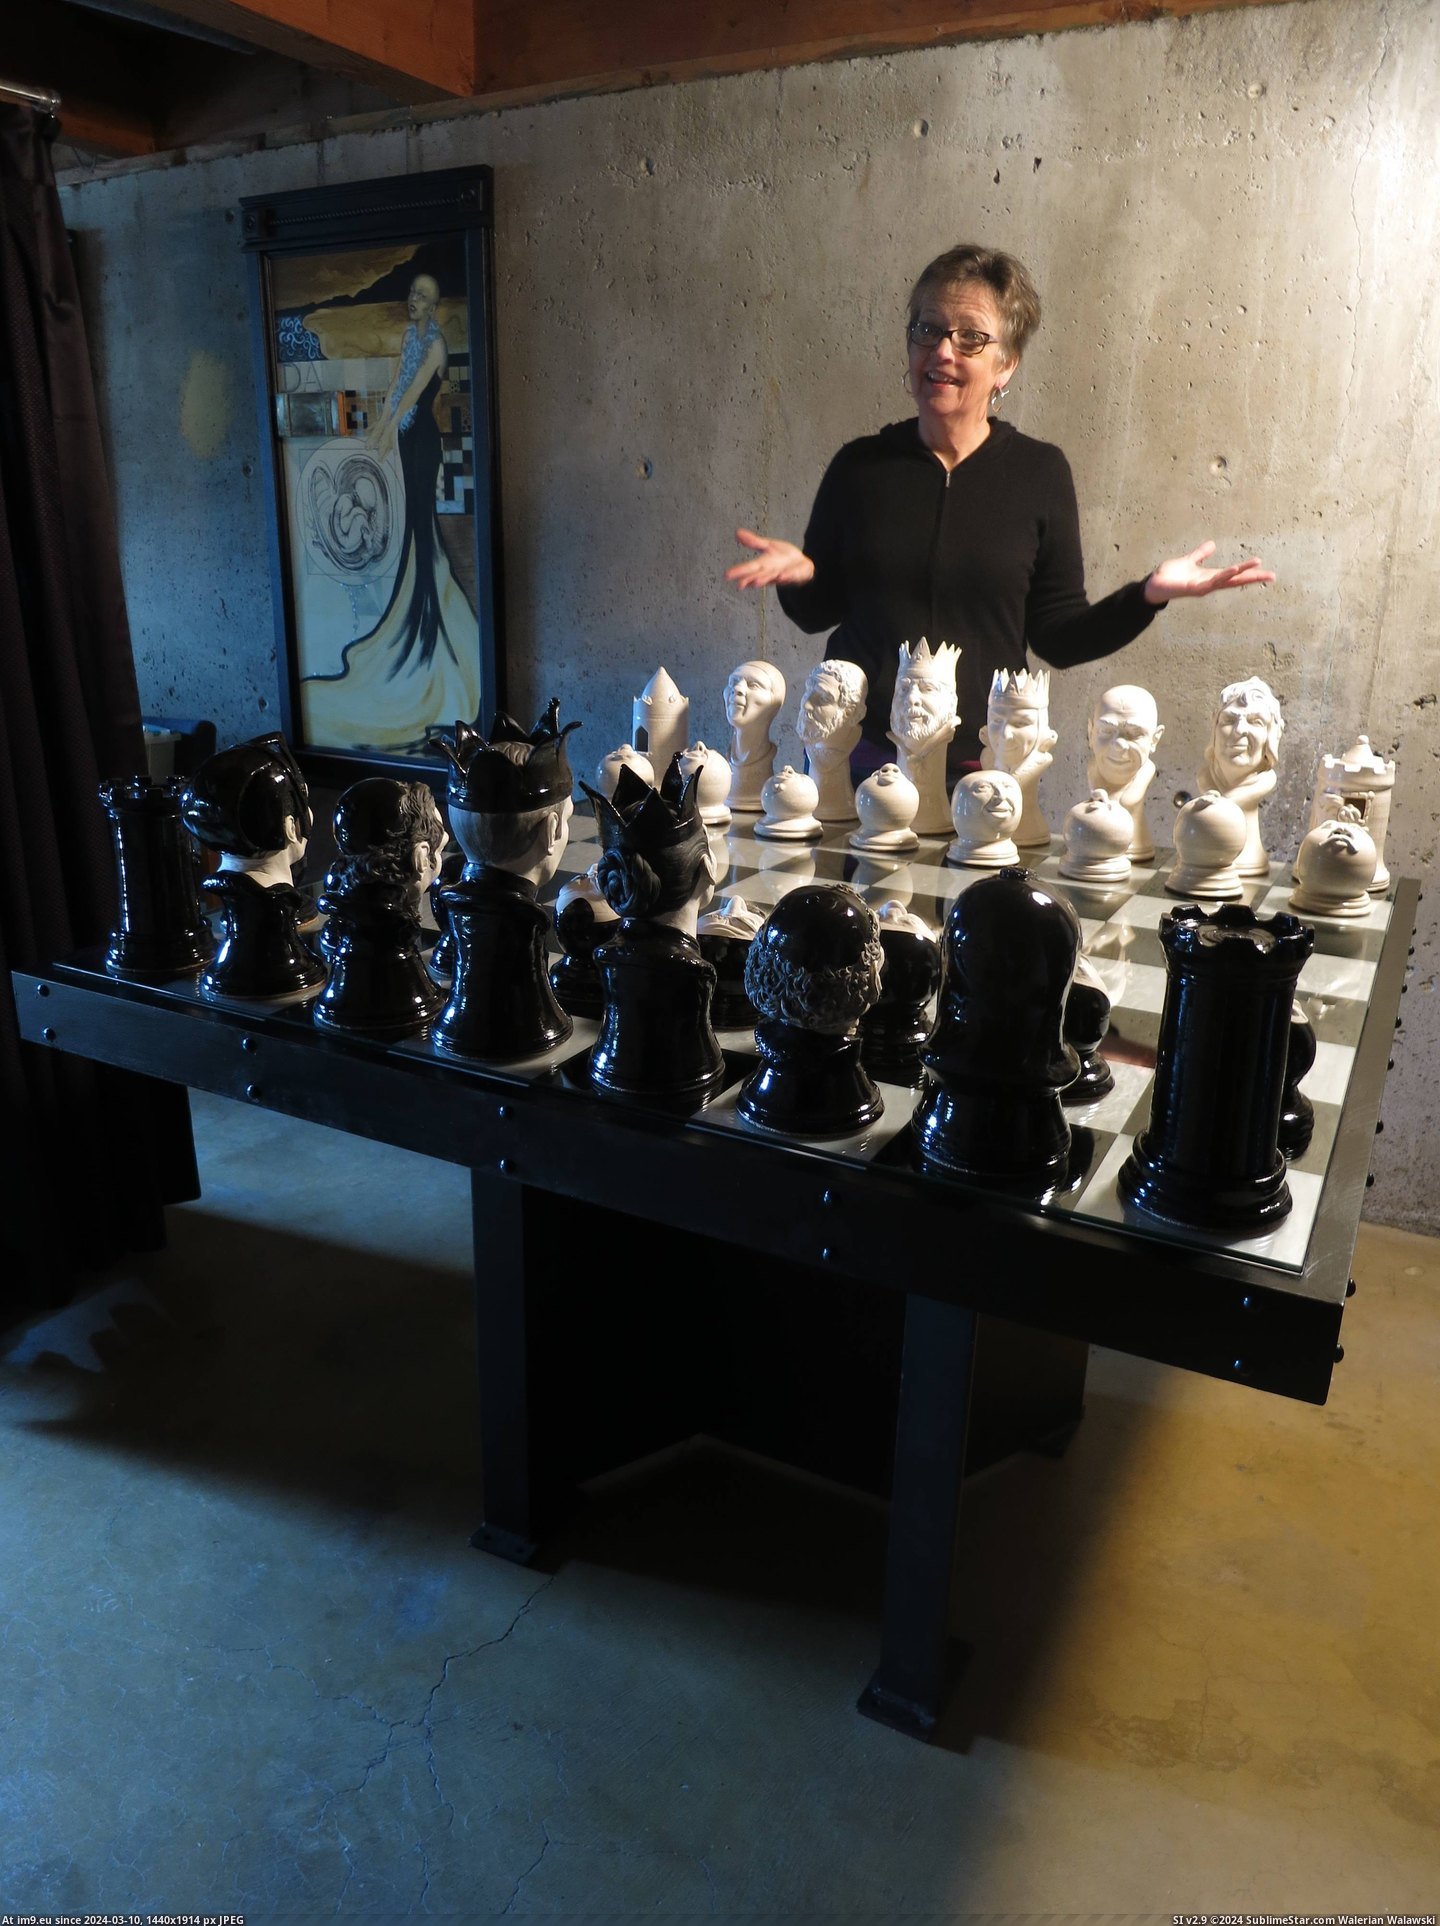 #Share #Thought #Medieval #Chess #Mom #Finished [Pics] My Mom just finished her Medieval Chess Set. Thought I should share. 3 Pic. (Image of album My r/PICS favs))